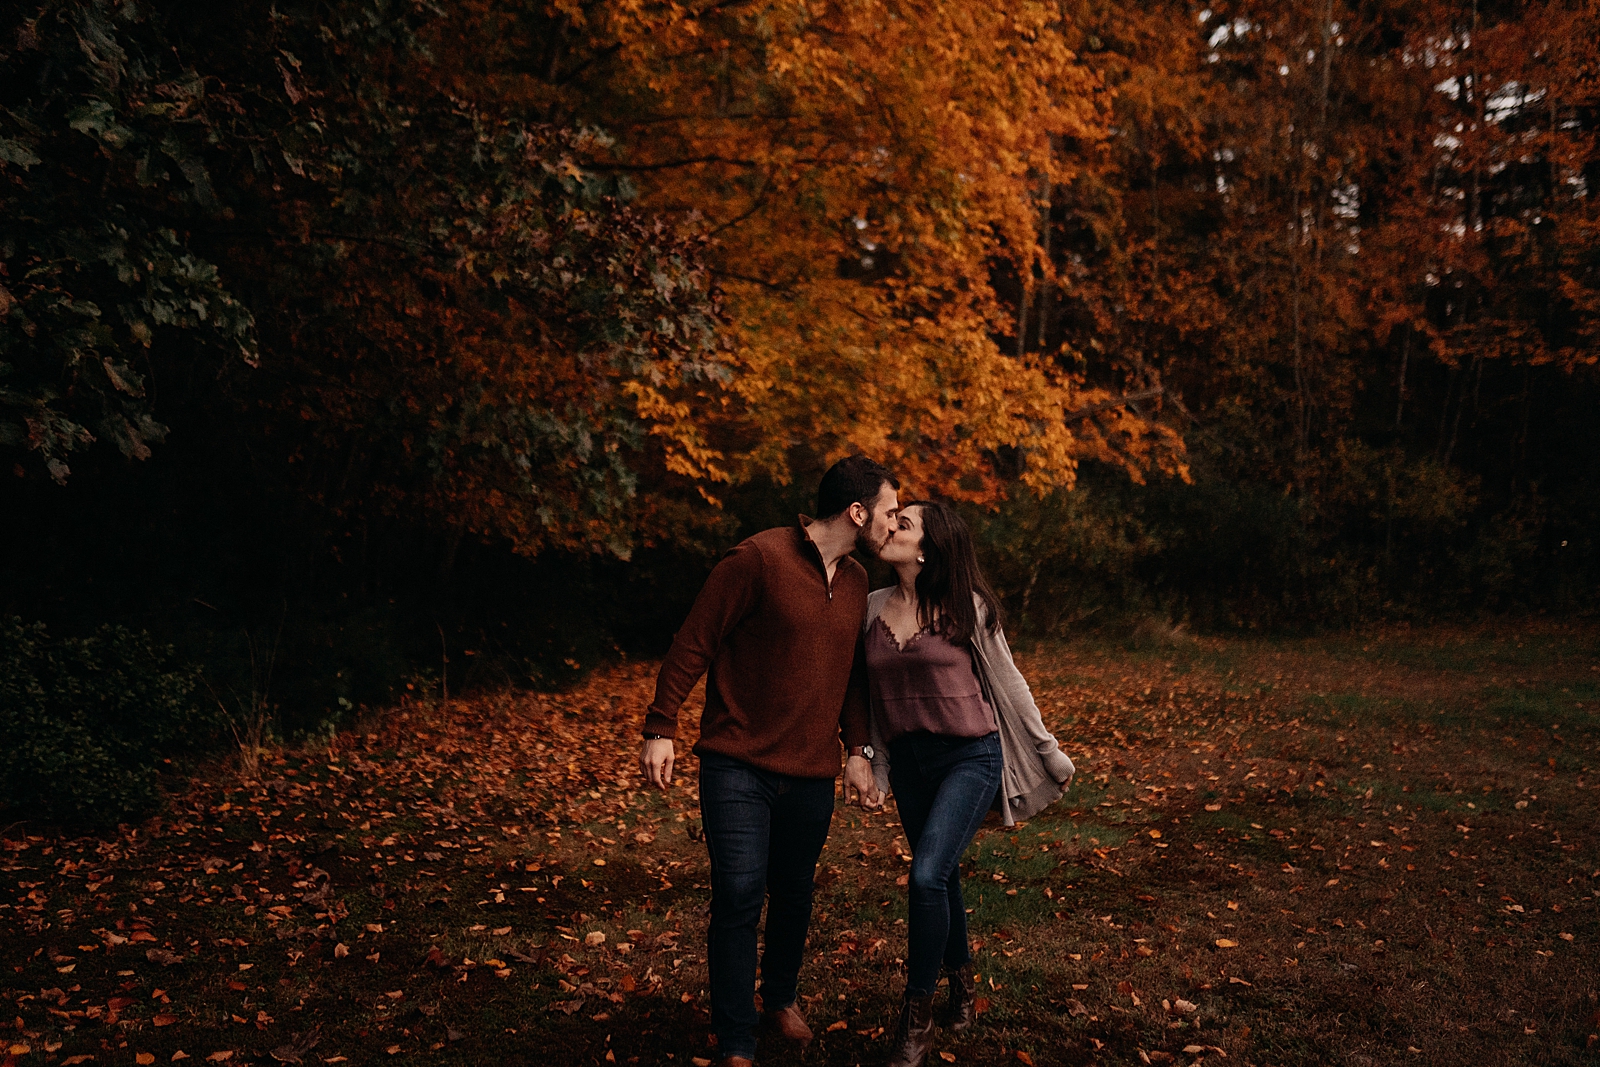 Couple kissing and walking in fallen leaf forest